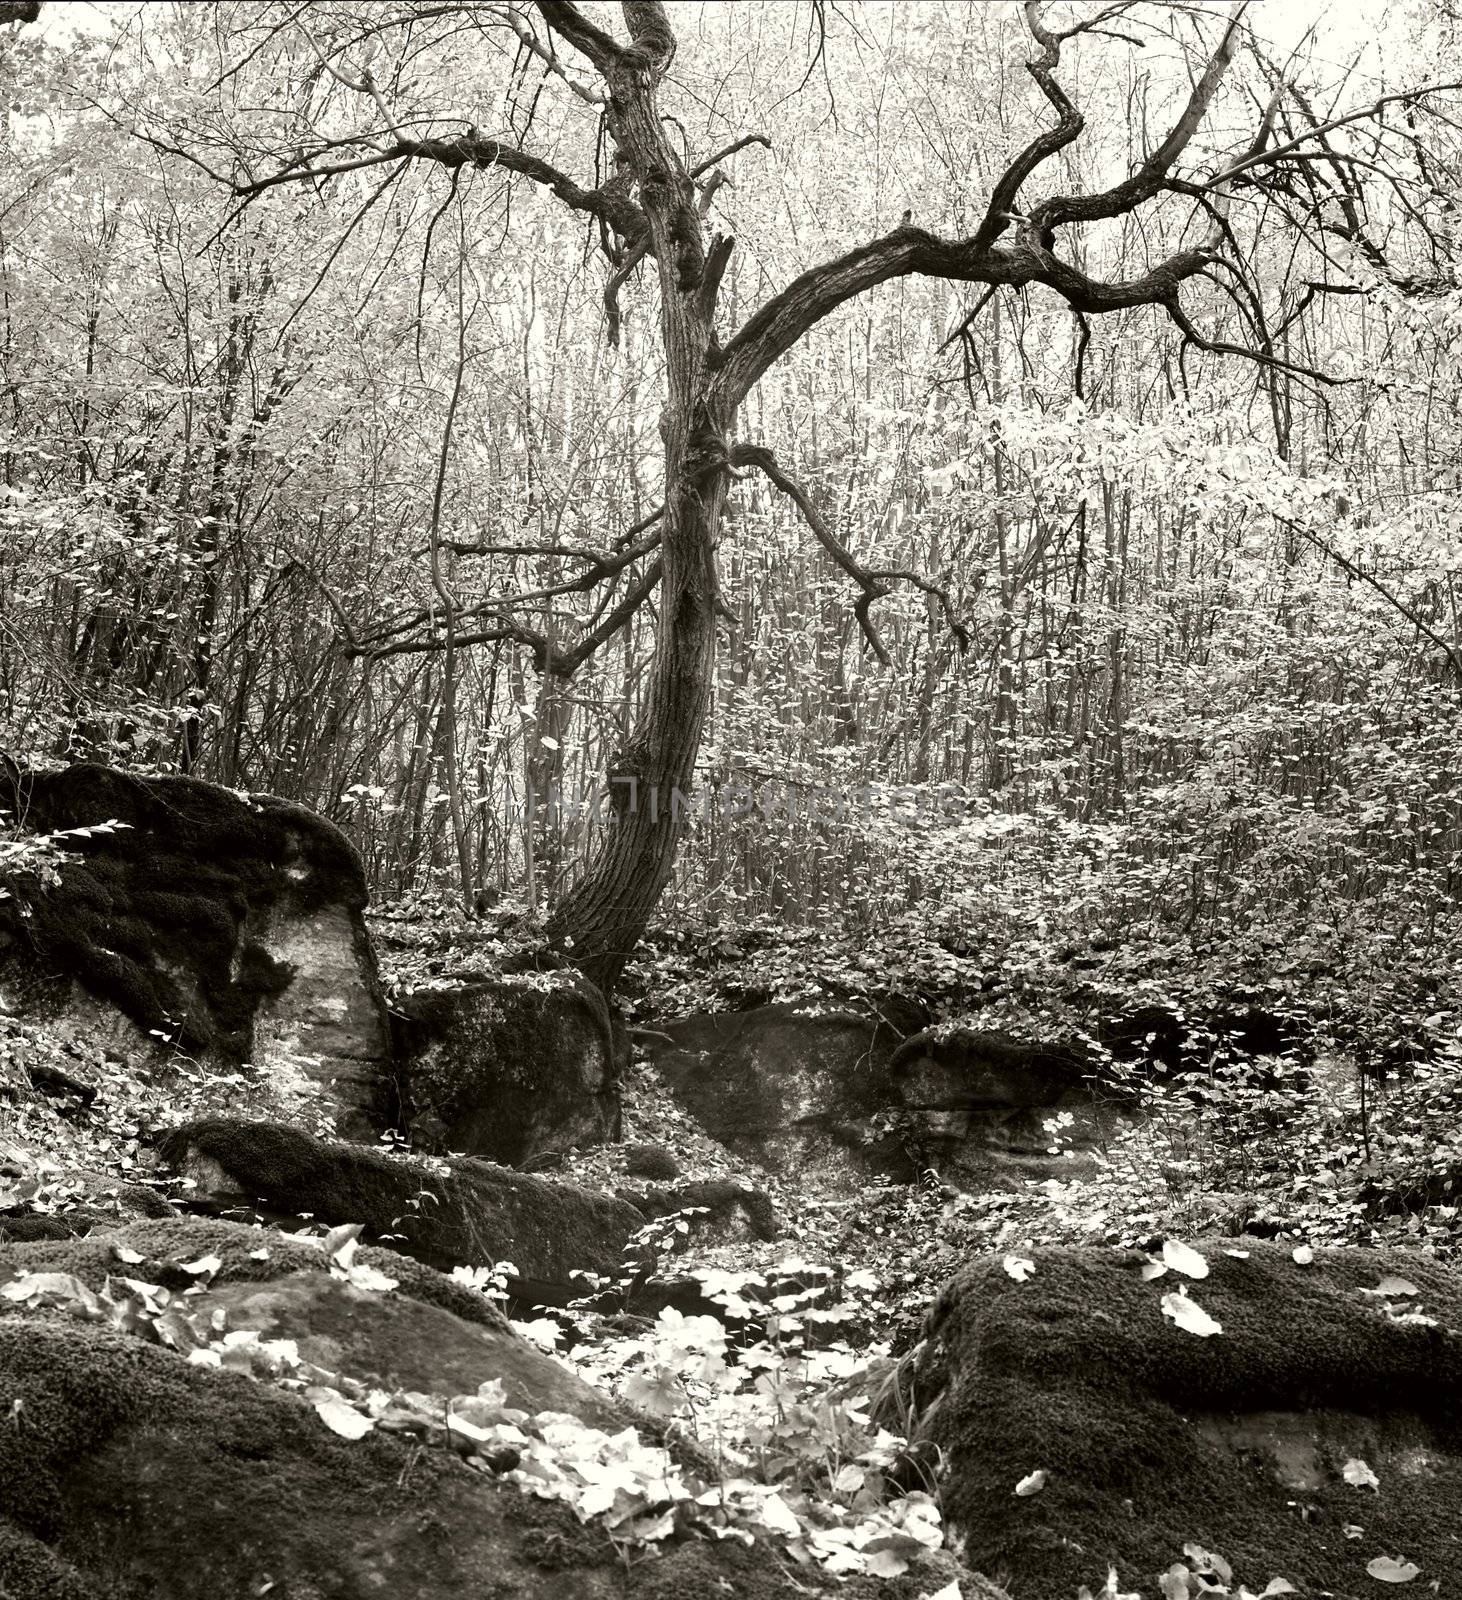 An image of old tree and stones